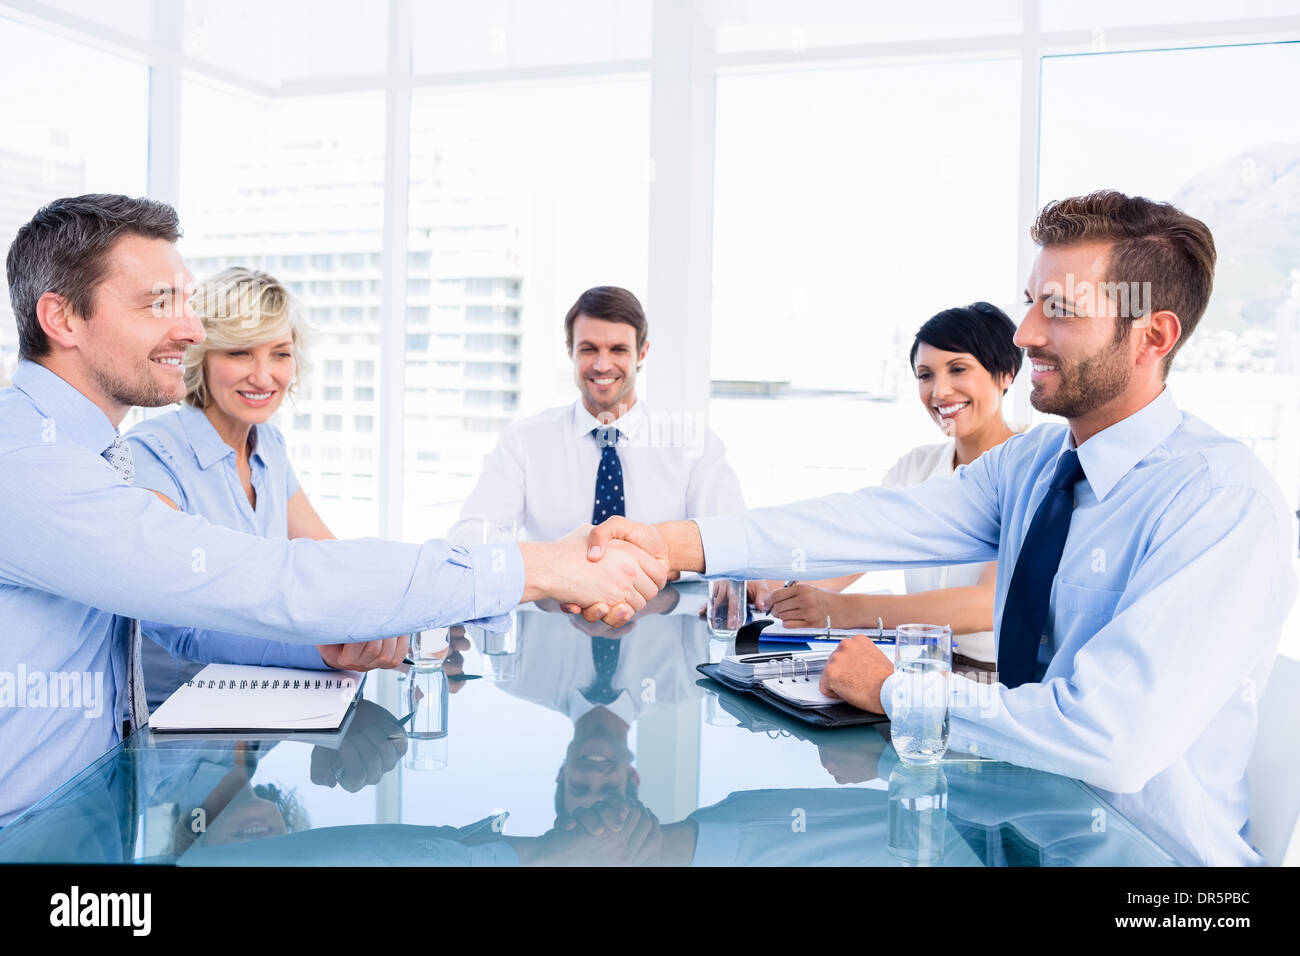 Executives shaking hands during business meeting Stock Photo